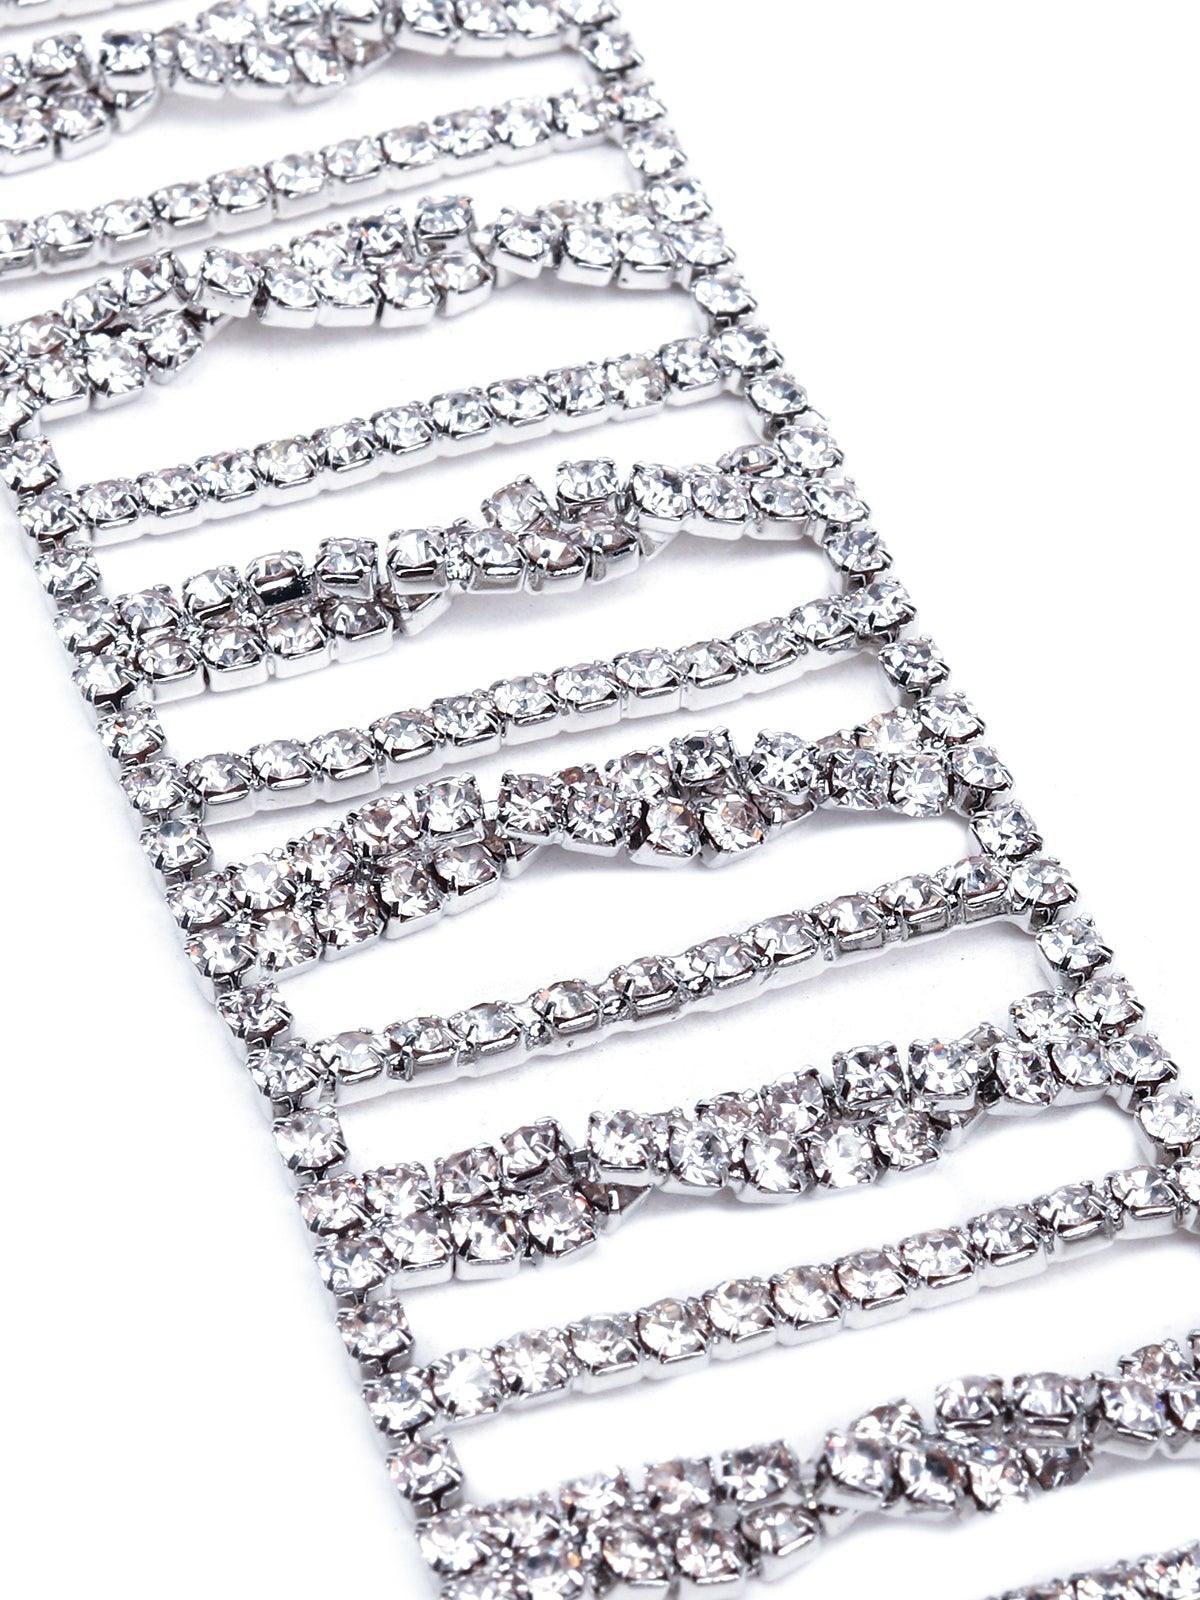 Women's Exquisite Crystal Lined Choker -Silver - Odette